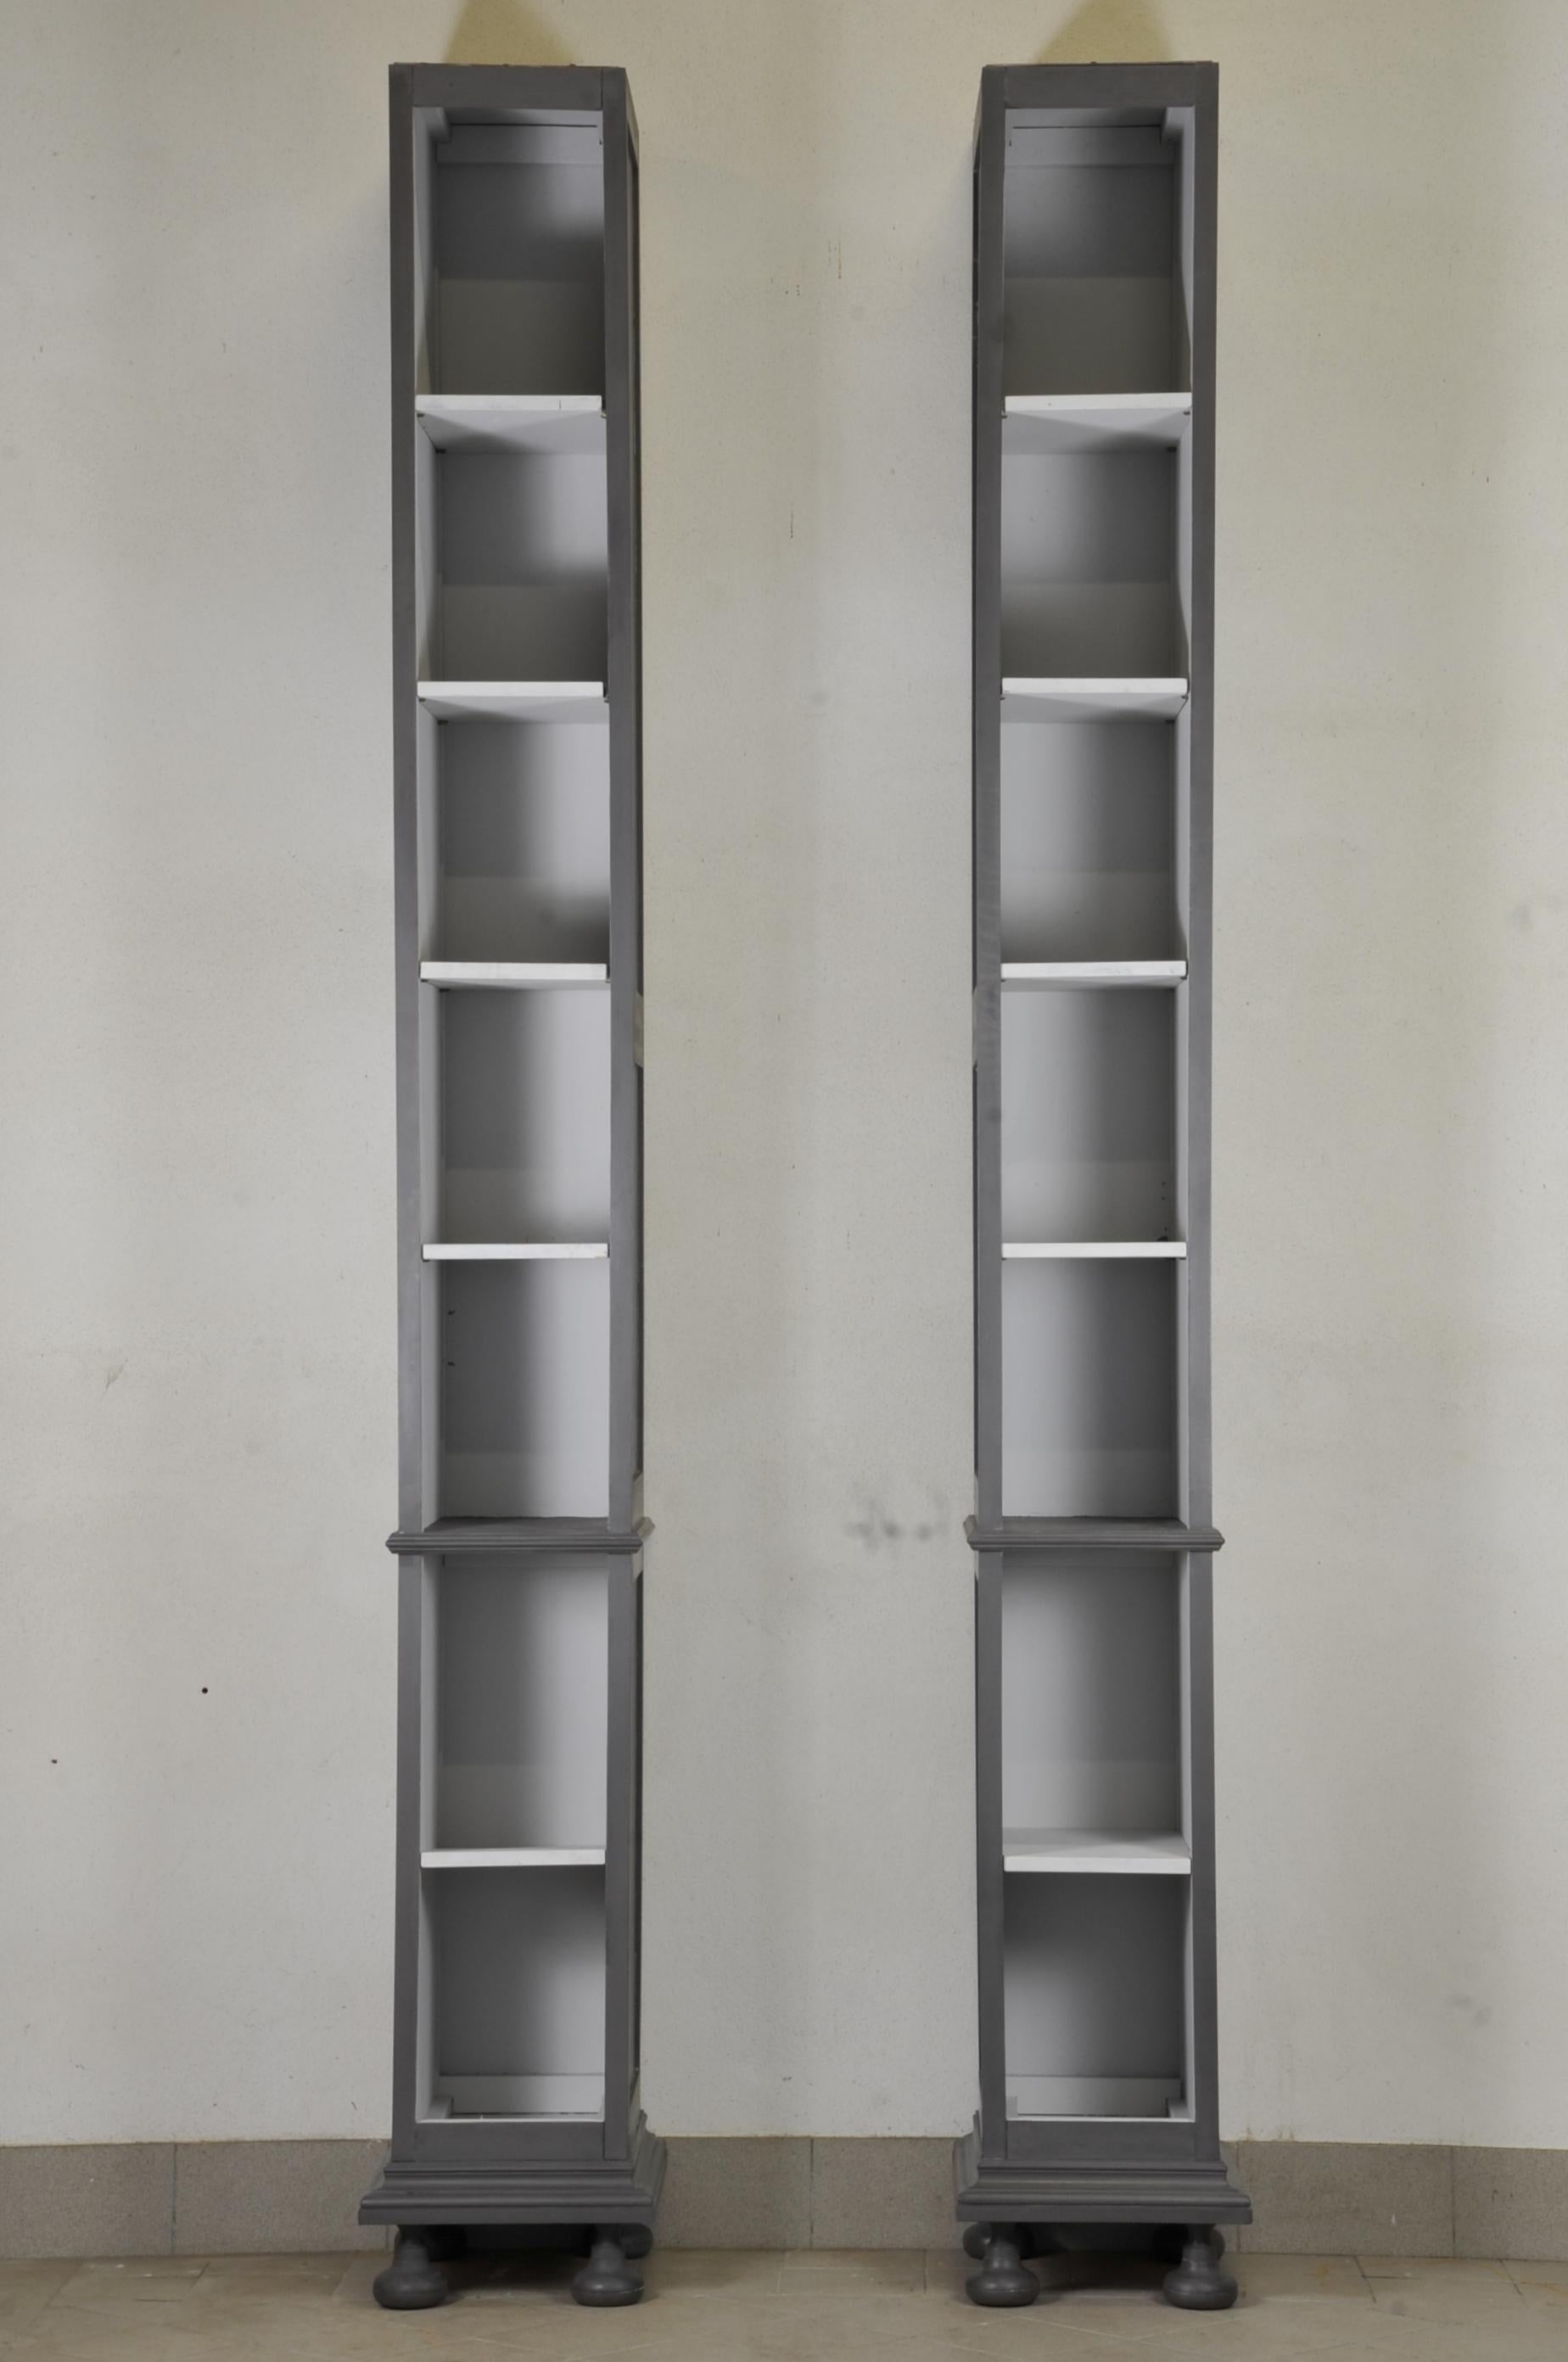 Astonishing pair of bookcases or presentation columns with totally atypical dimensions made of ash gray patinated wood, light gray painted interiors, four cheese legs.

Craftsmanship from the 1960s made for the private mansion of a Bordeaux